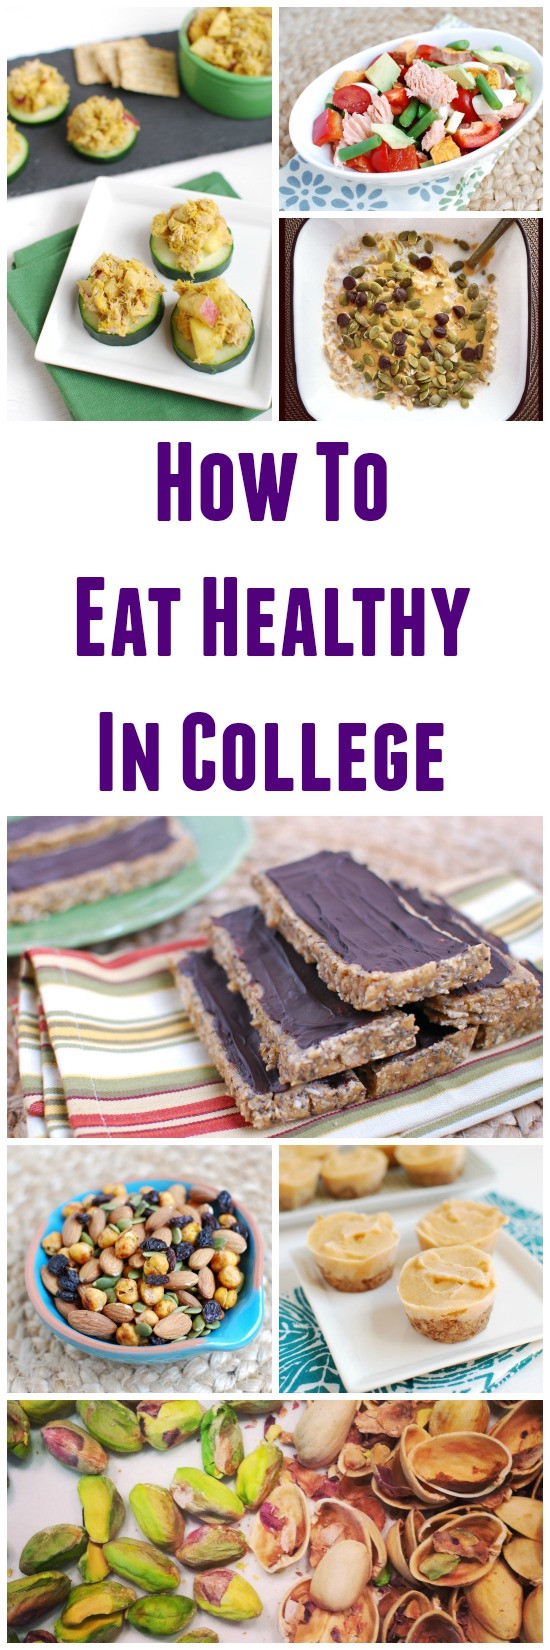 Healthy College Snacks
 How to Eat Healthy in College